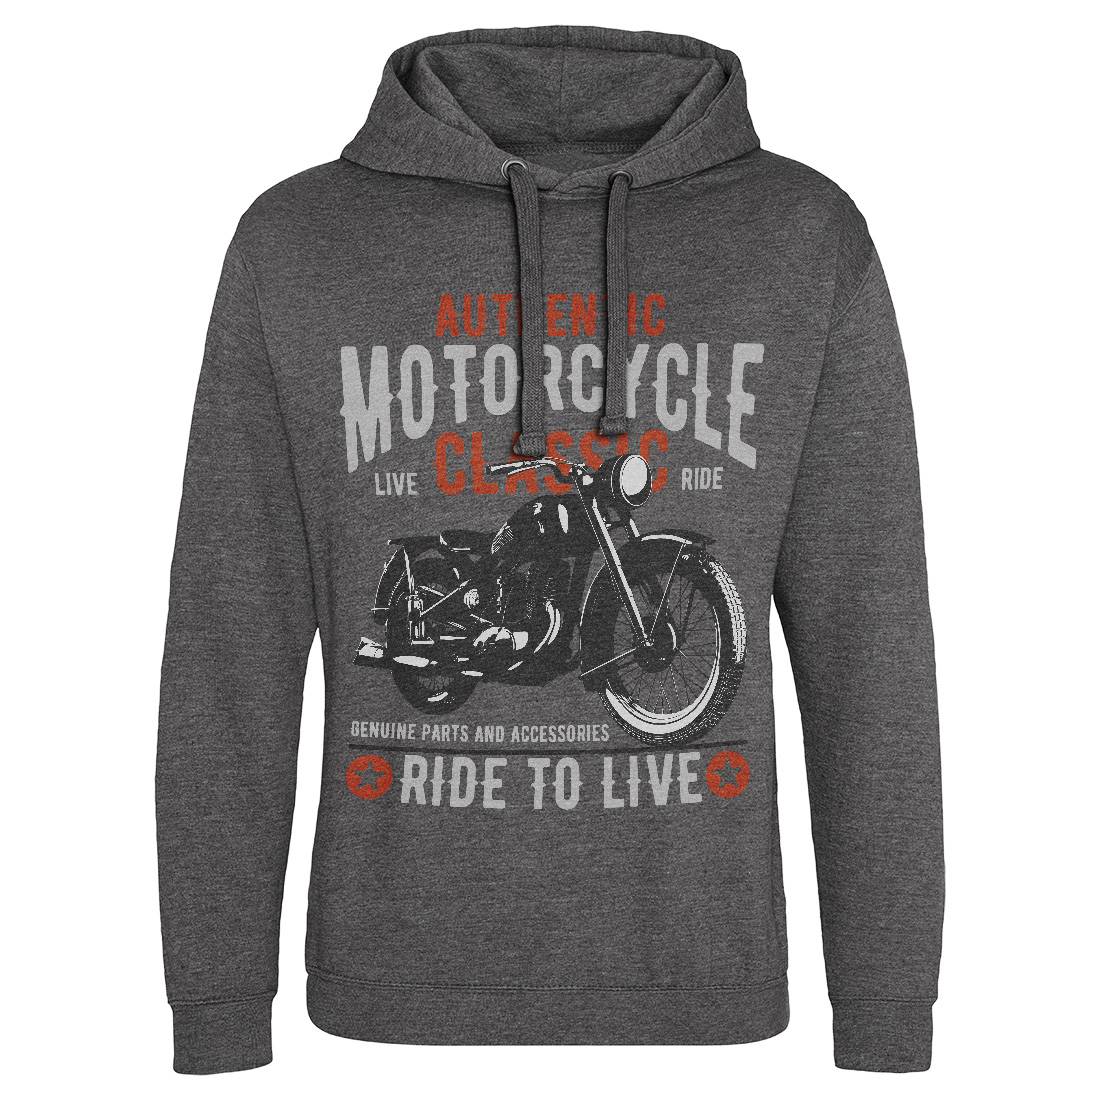 Classic Mens Hoodie Without Pocket Motorcycles B318